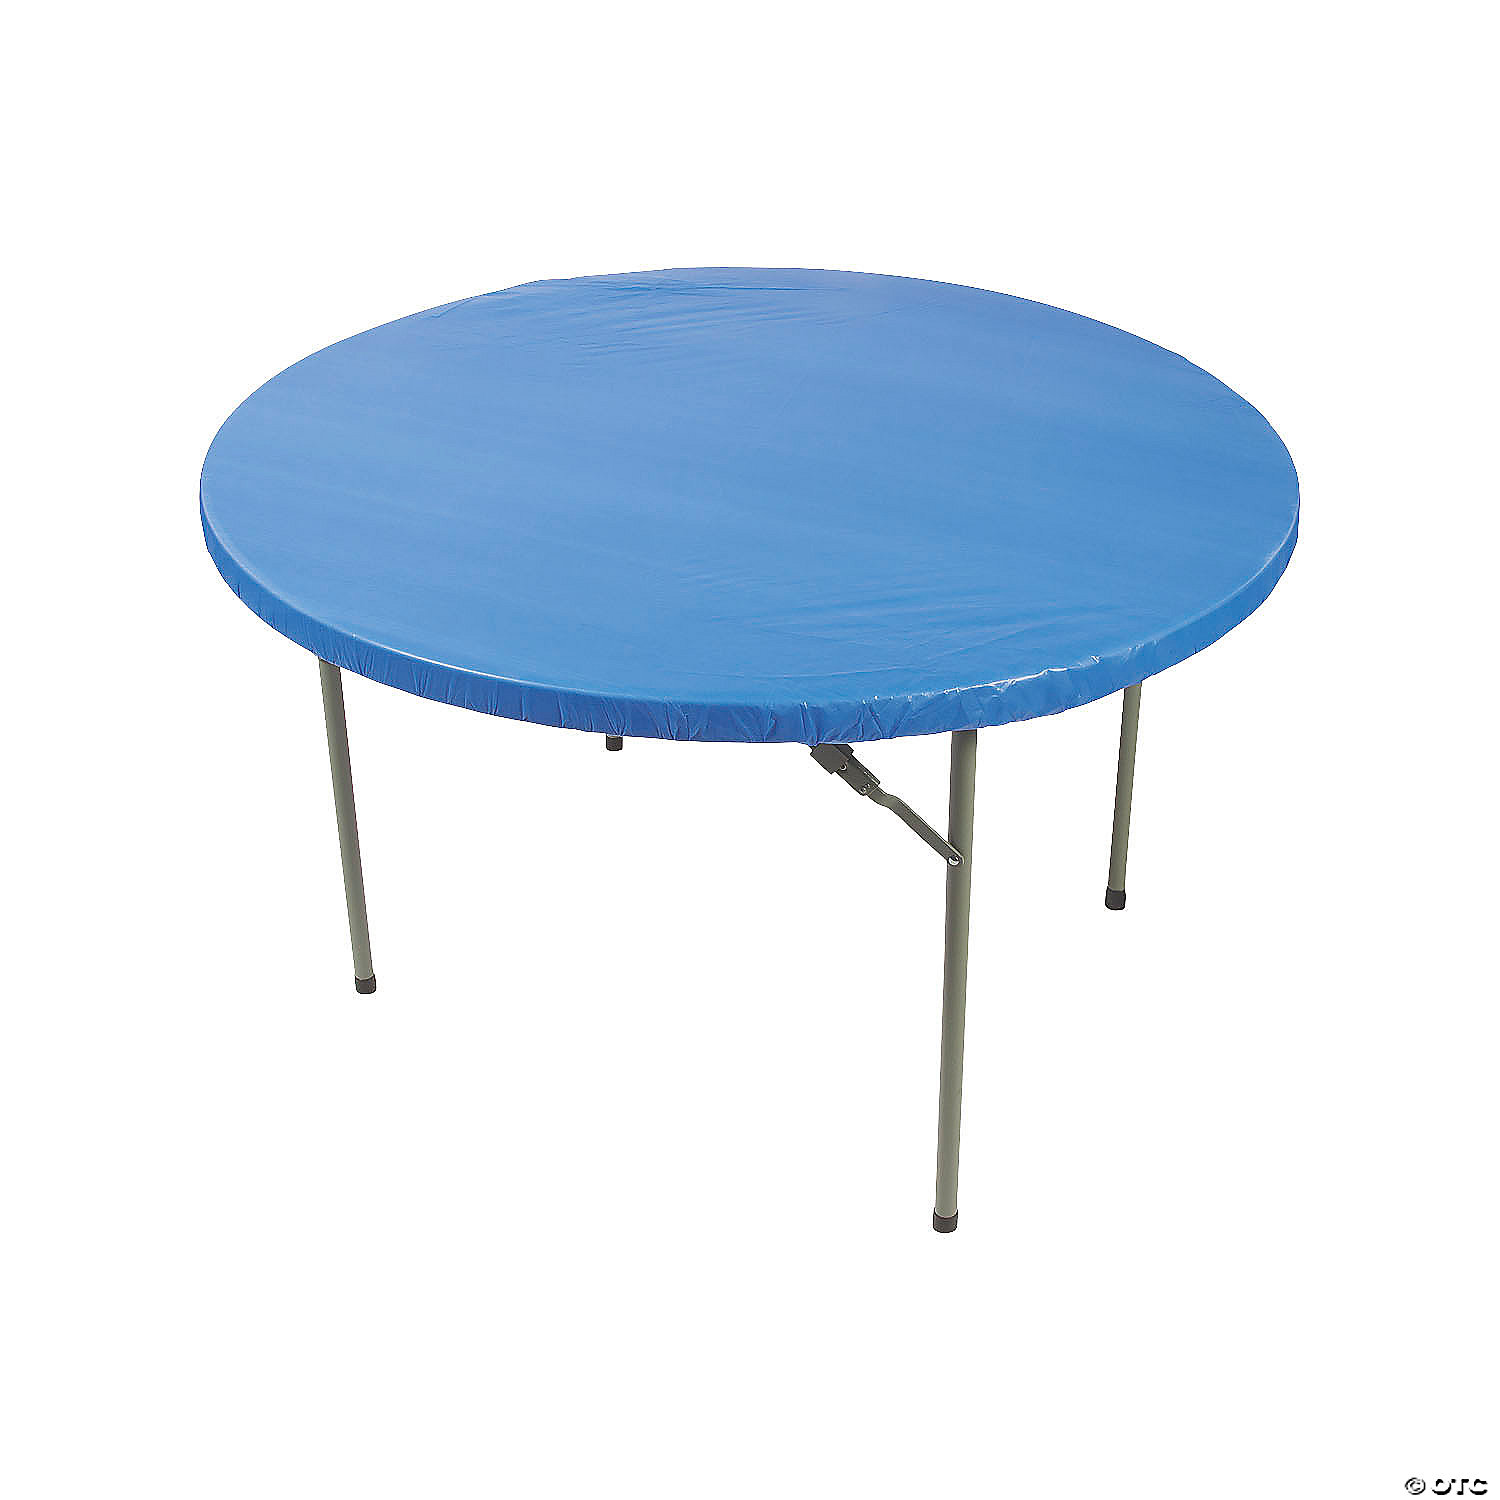 Fitted Round Plastic Tablecloth, Black Round Tablecloths In Bulk